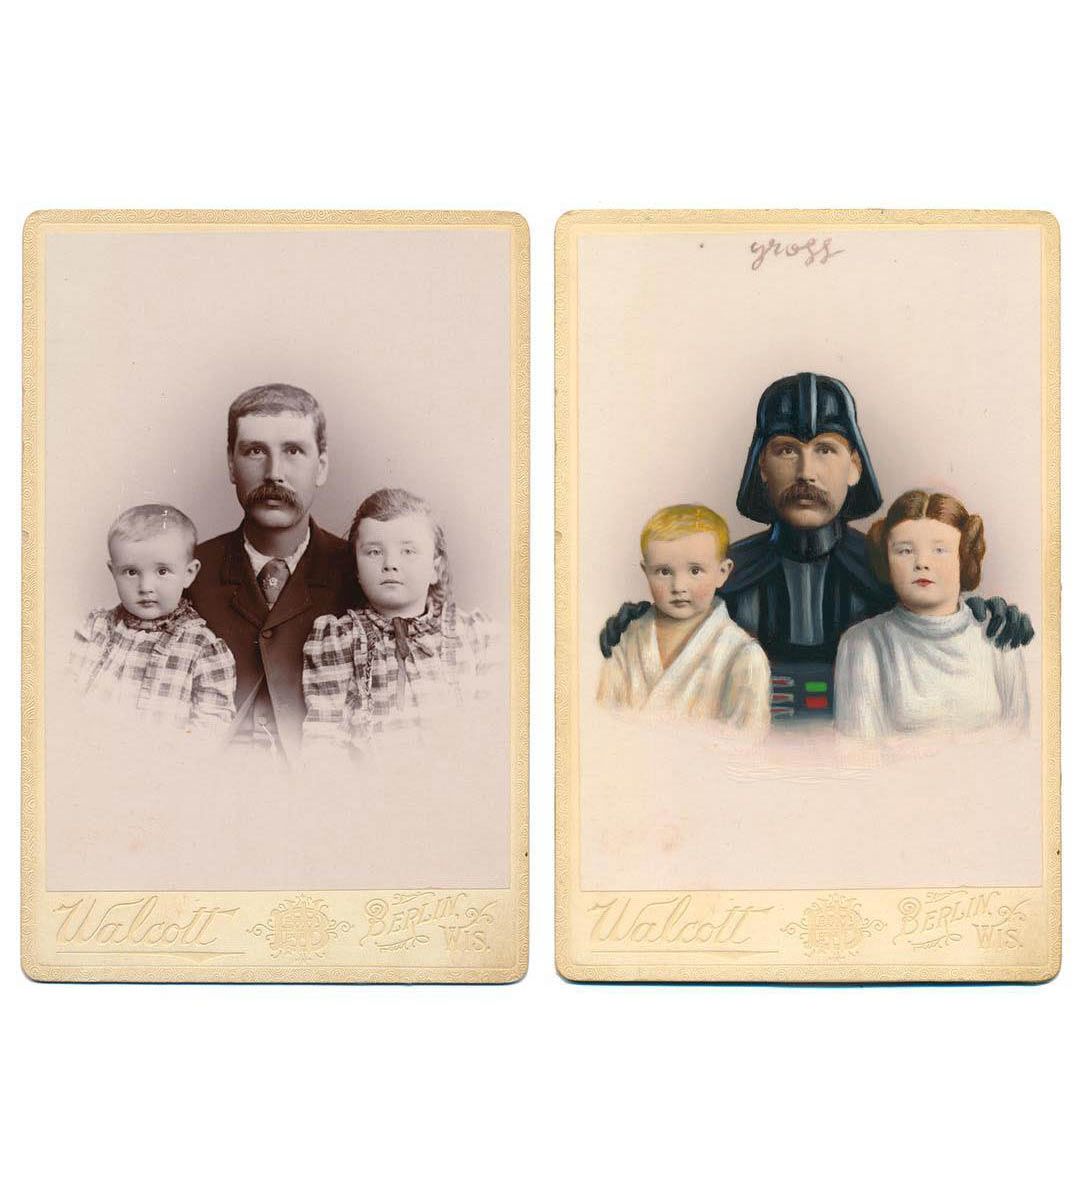 Transformations - The Cabinet Card Paintings of Alex Gross 2012-2019